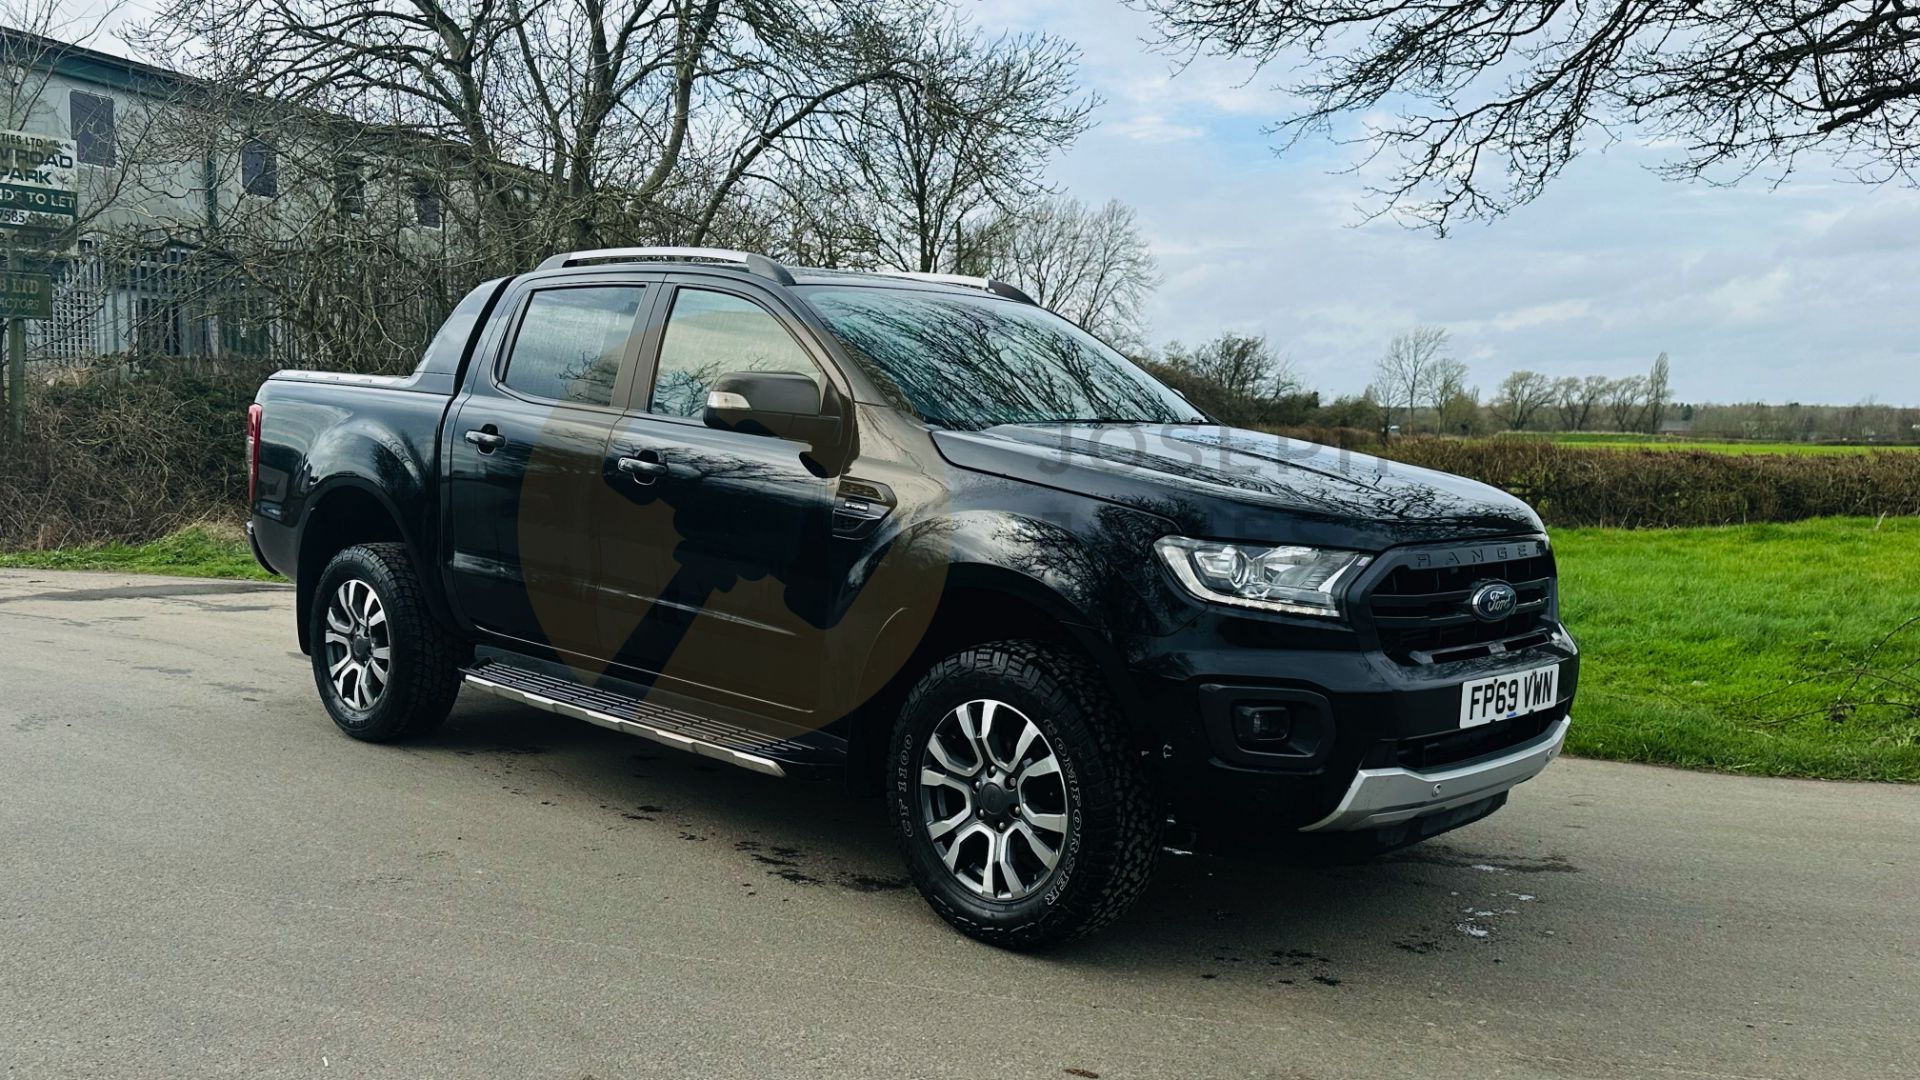 FORD RANGER *WILDTRAK* DOUBLE CAB PICK-UP (2020 - FACELIFT MODEL) 2.0 TDCI 'ECOBLUE' - 10 SPEED AUTO - Image 3 of 45